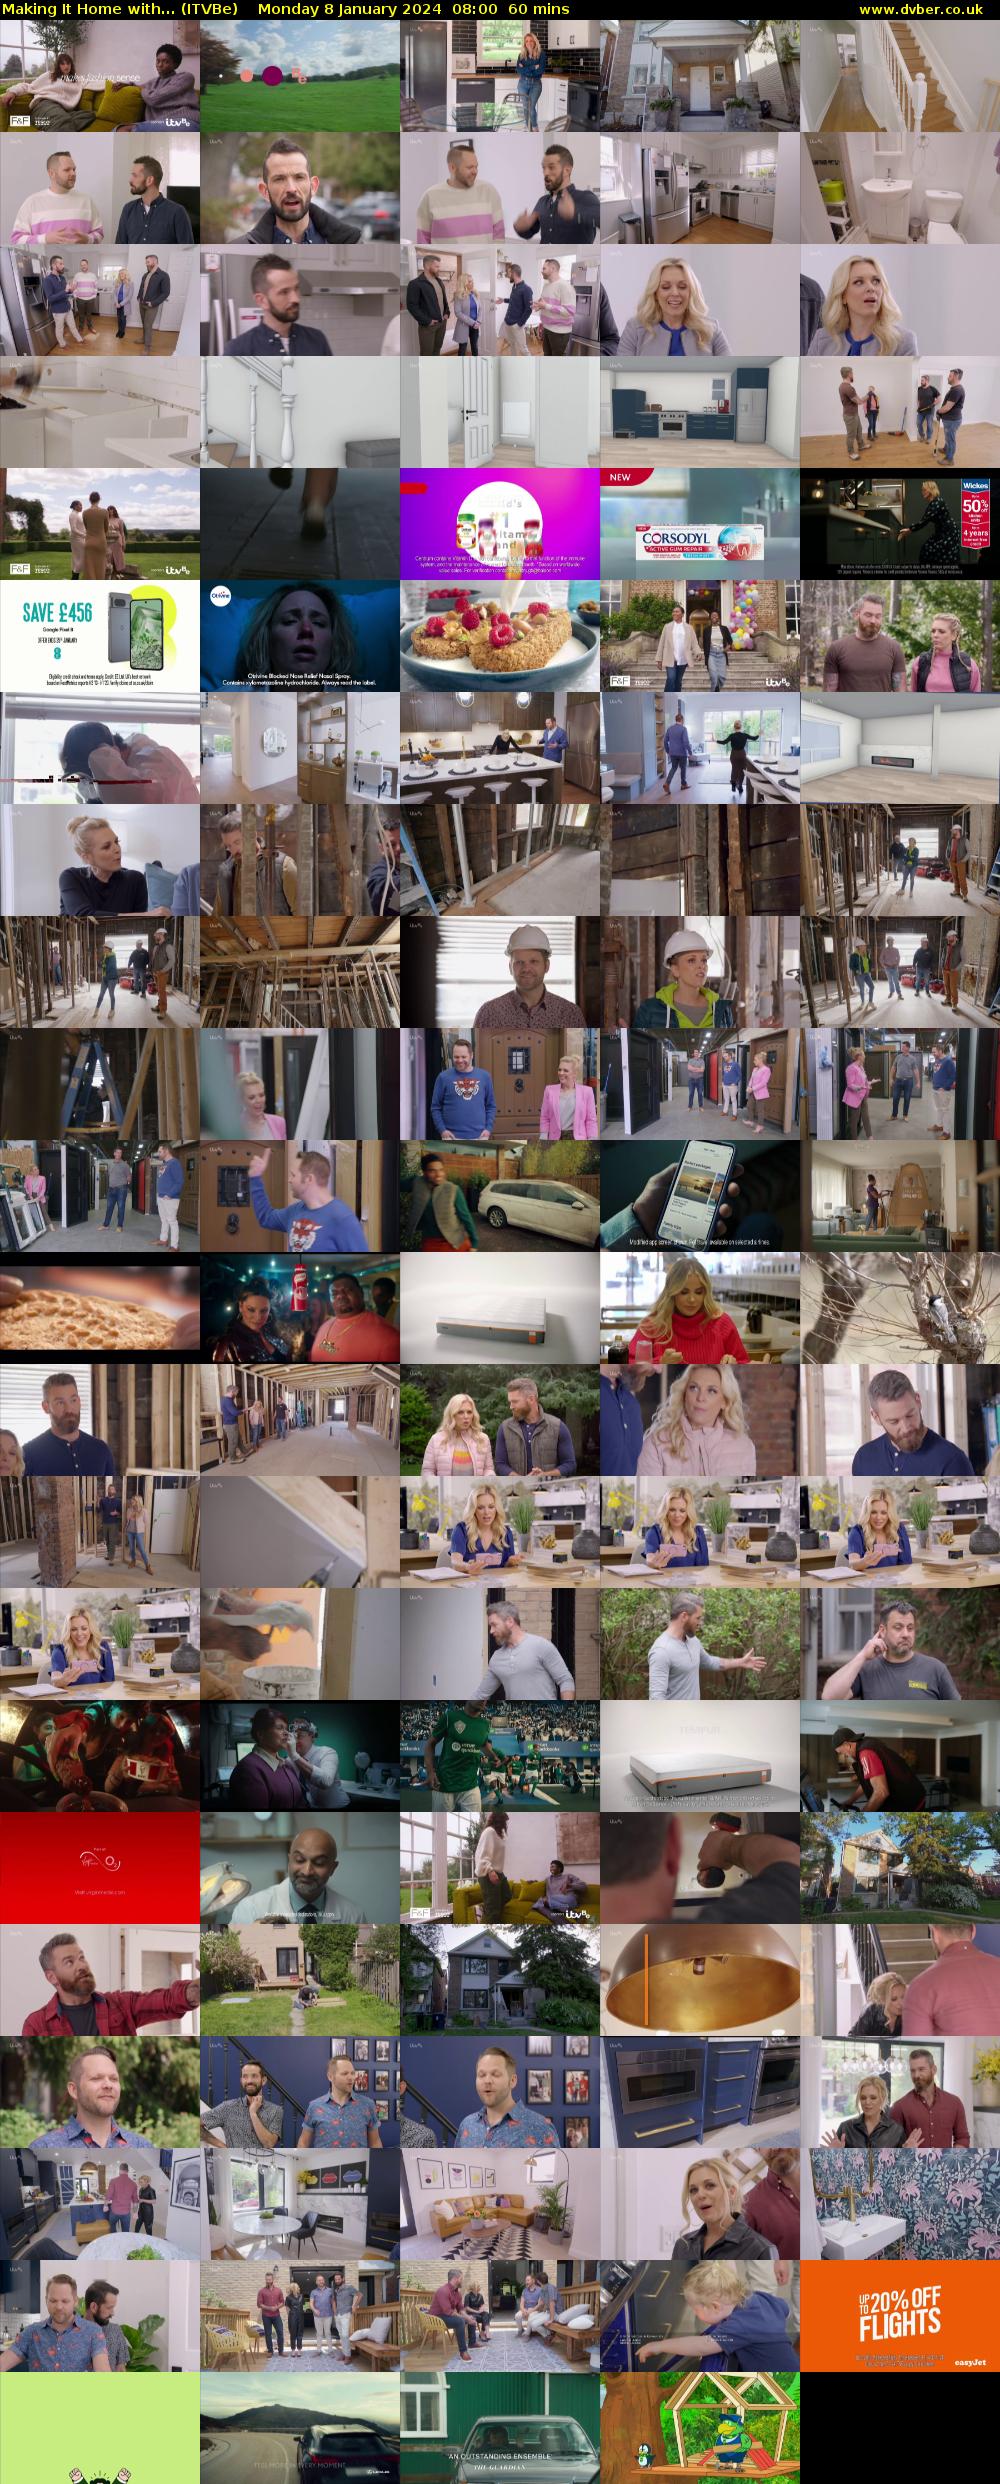 Making It Home with... (ITVBe) Monday 8 January 2024 08:00 - 09:00